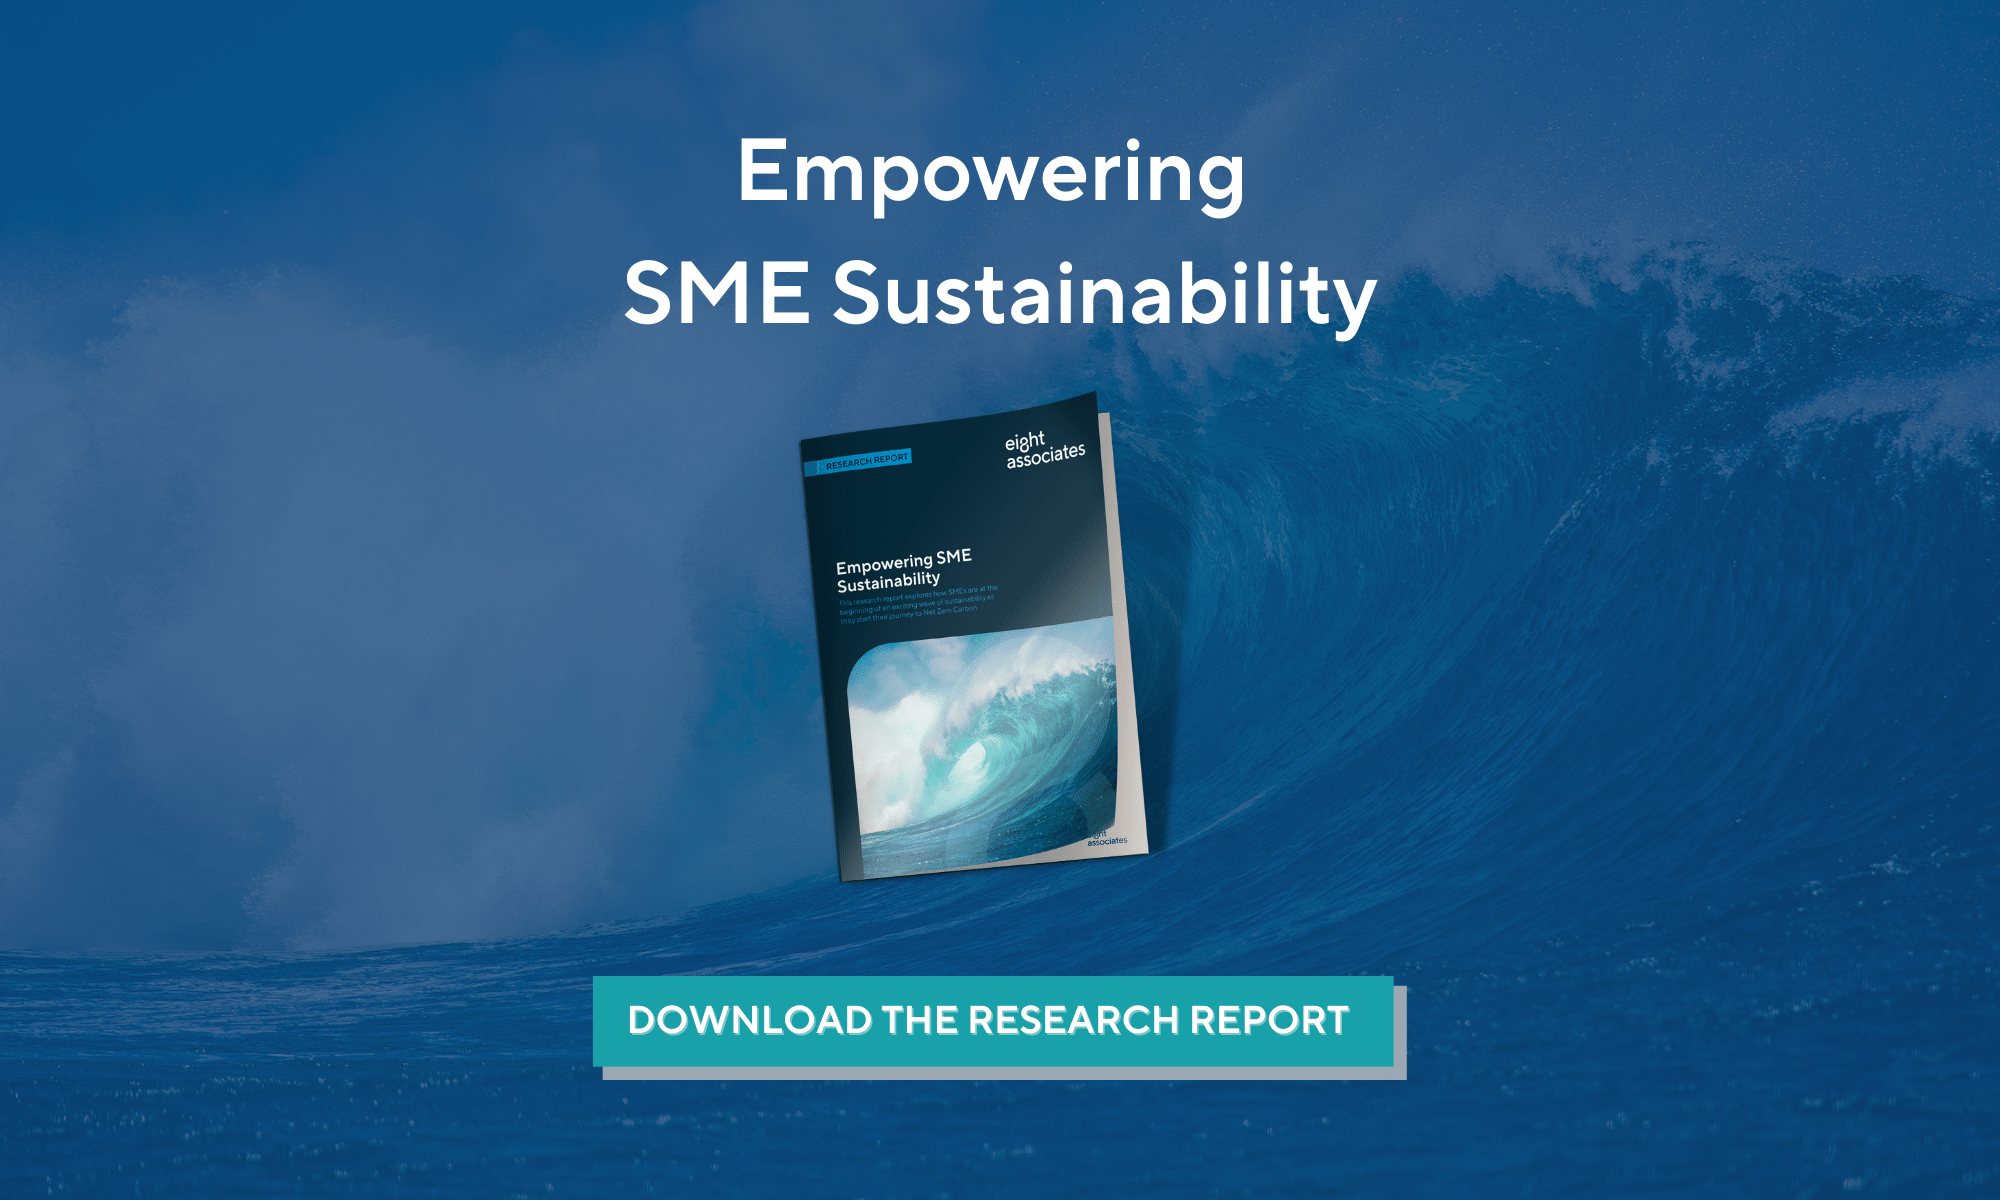 SME Sustainability Research Image